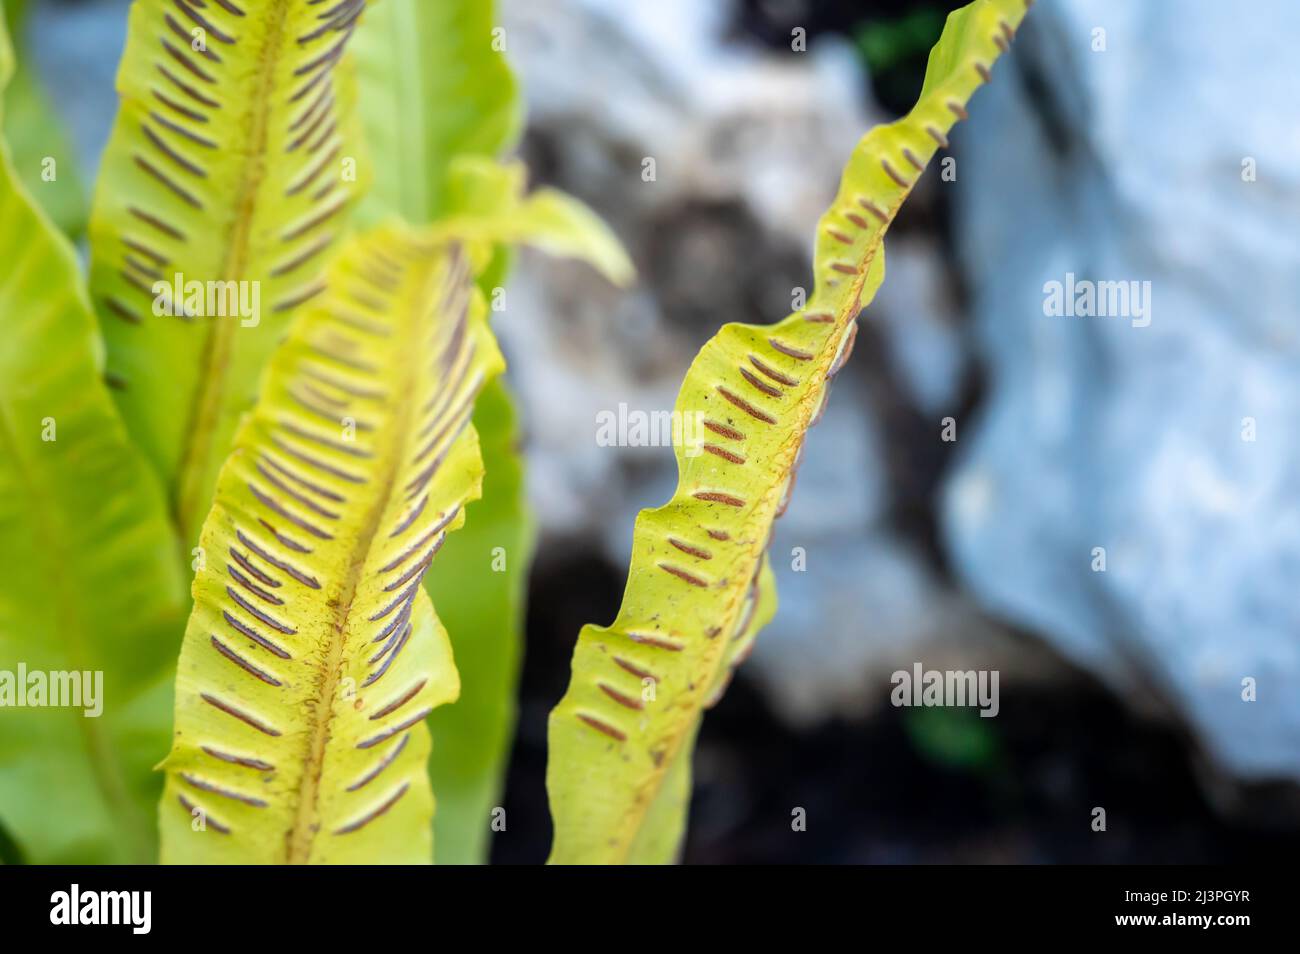 Sporangia on fern. Groupes de sporanges on fern leaves. Reproduction of olypodiopsida or Polypodiophyta. Beauty in nature. Stock Photo